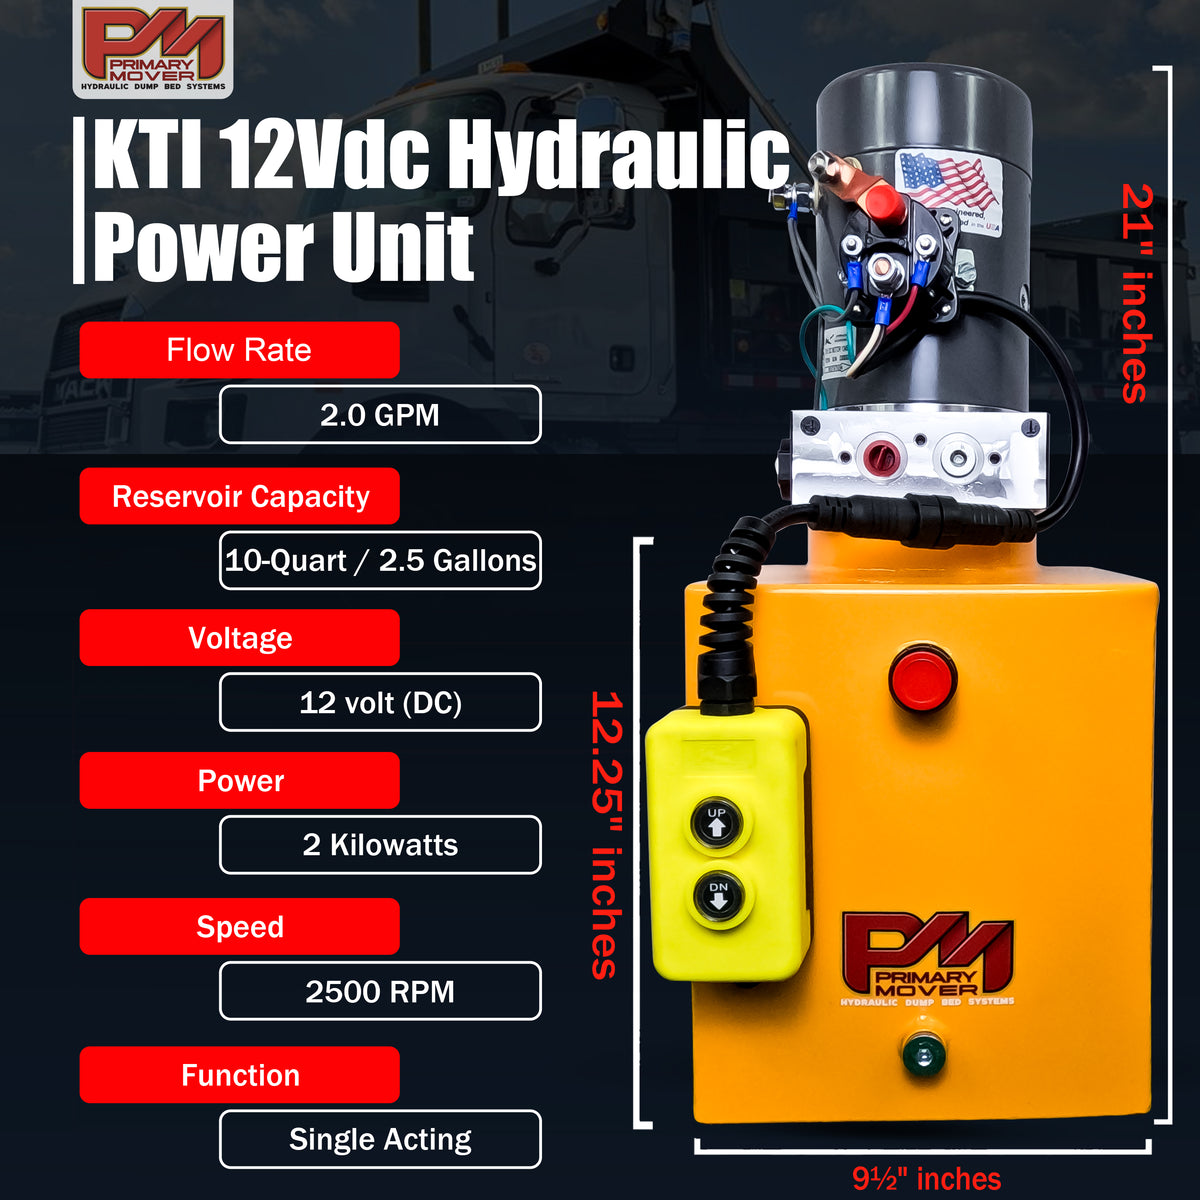 KTI 12V Single-Acting Hydraulic Pump - Steel Reservoir, featuring a compact design with a red button and multiple control elements visible. Ideal for hydraulic dump bed systems.